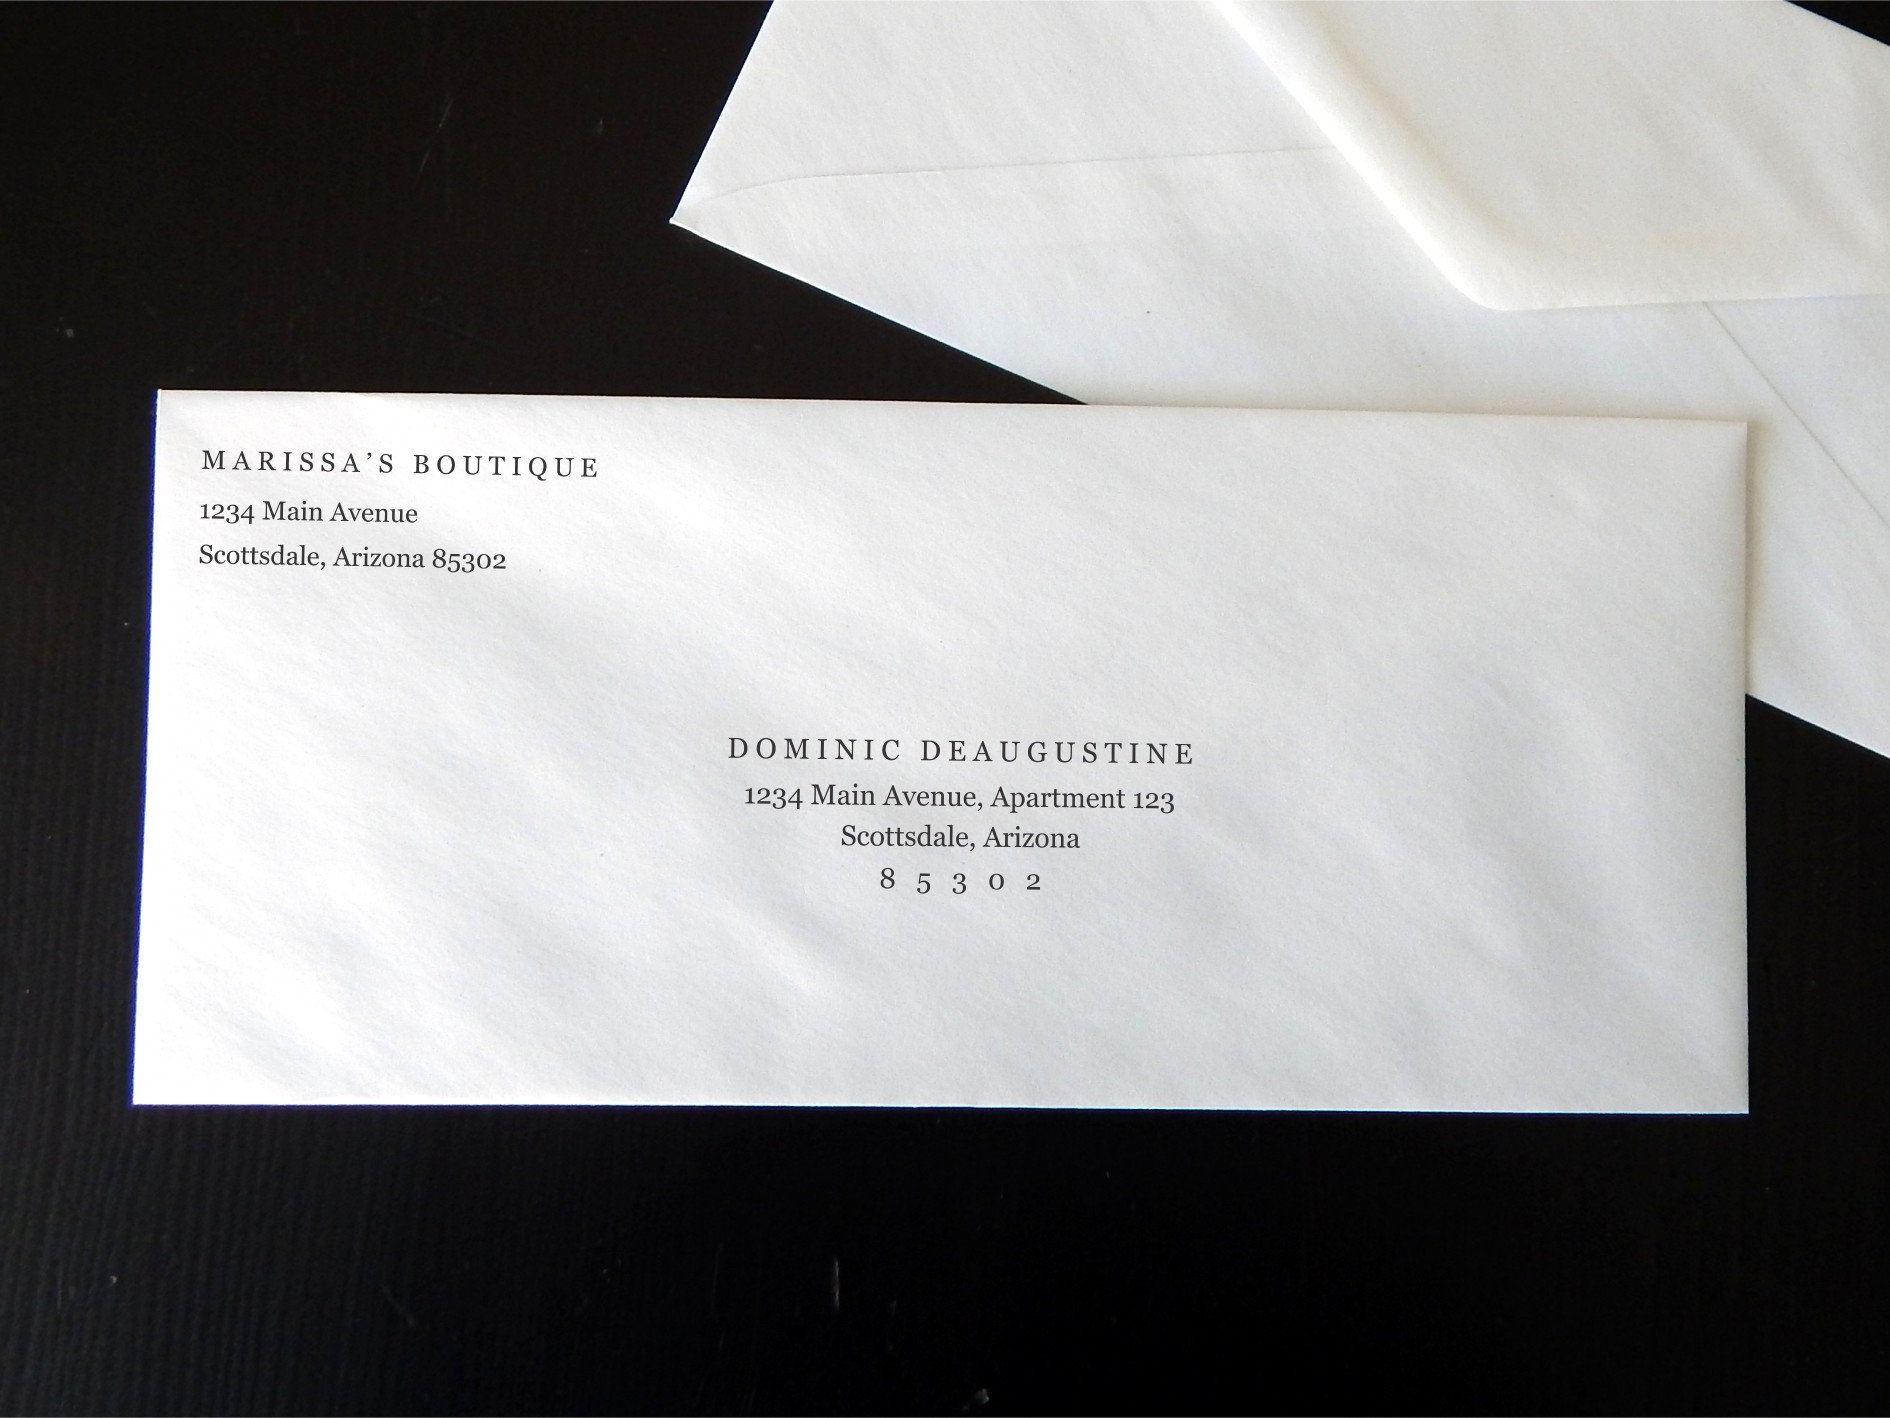 How To Address An Envelope To A Business Learn The Proper Format For